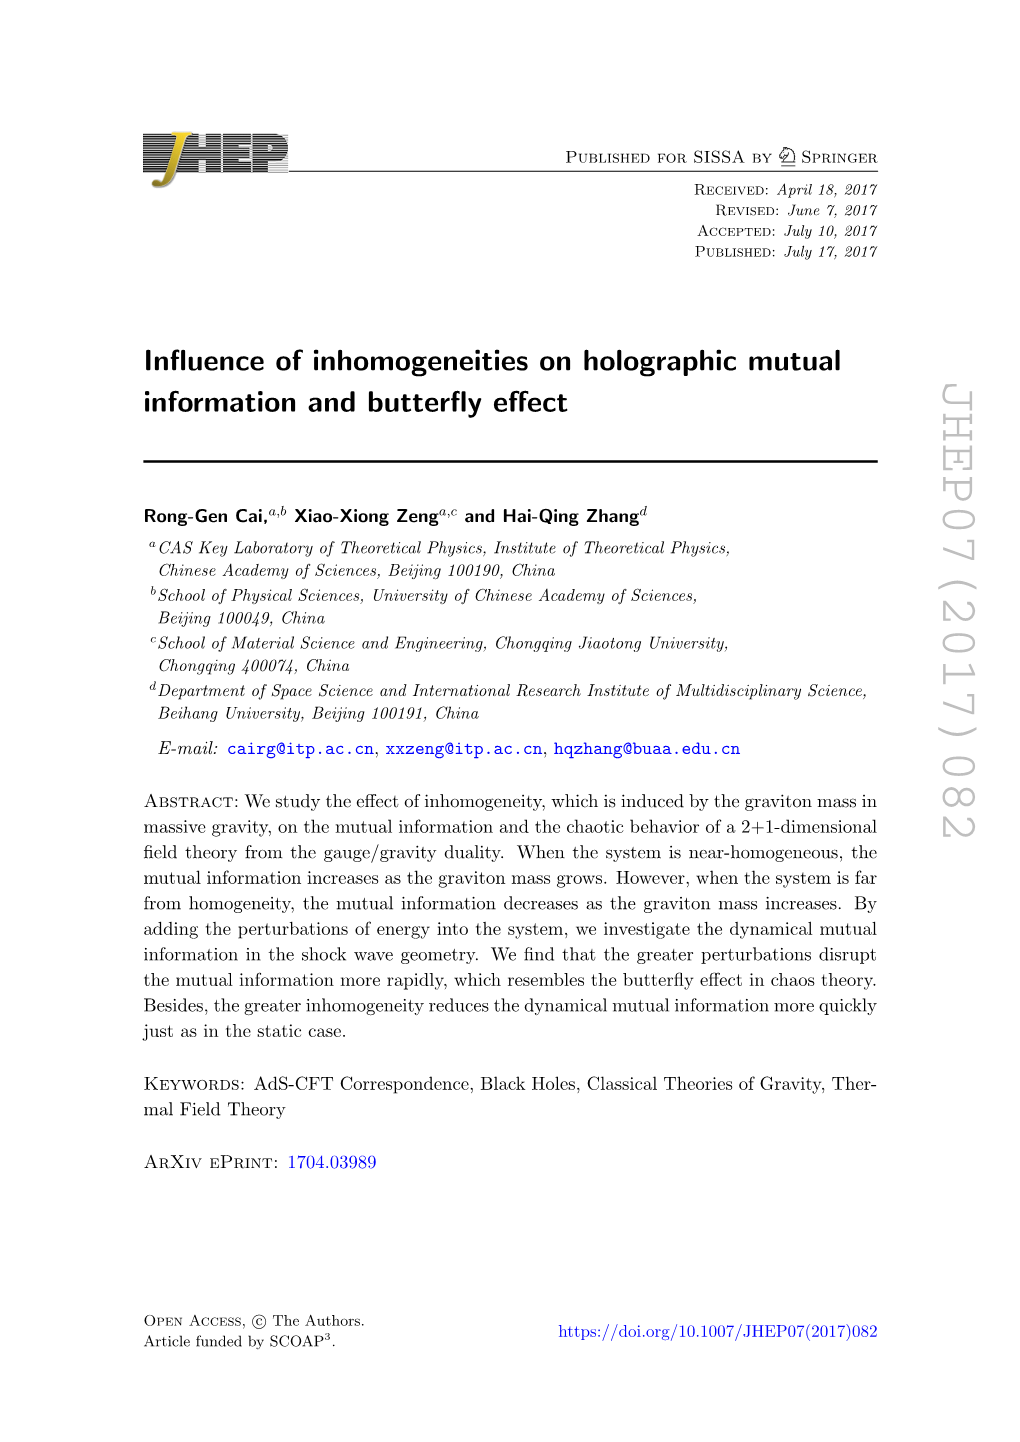 Influence of Inhomogeneities on Holographic Mutual Information And